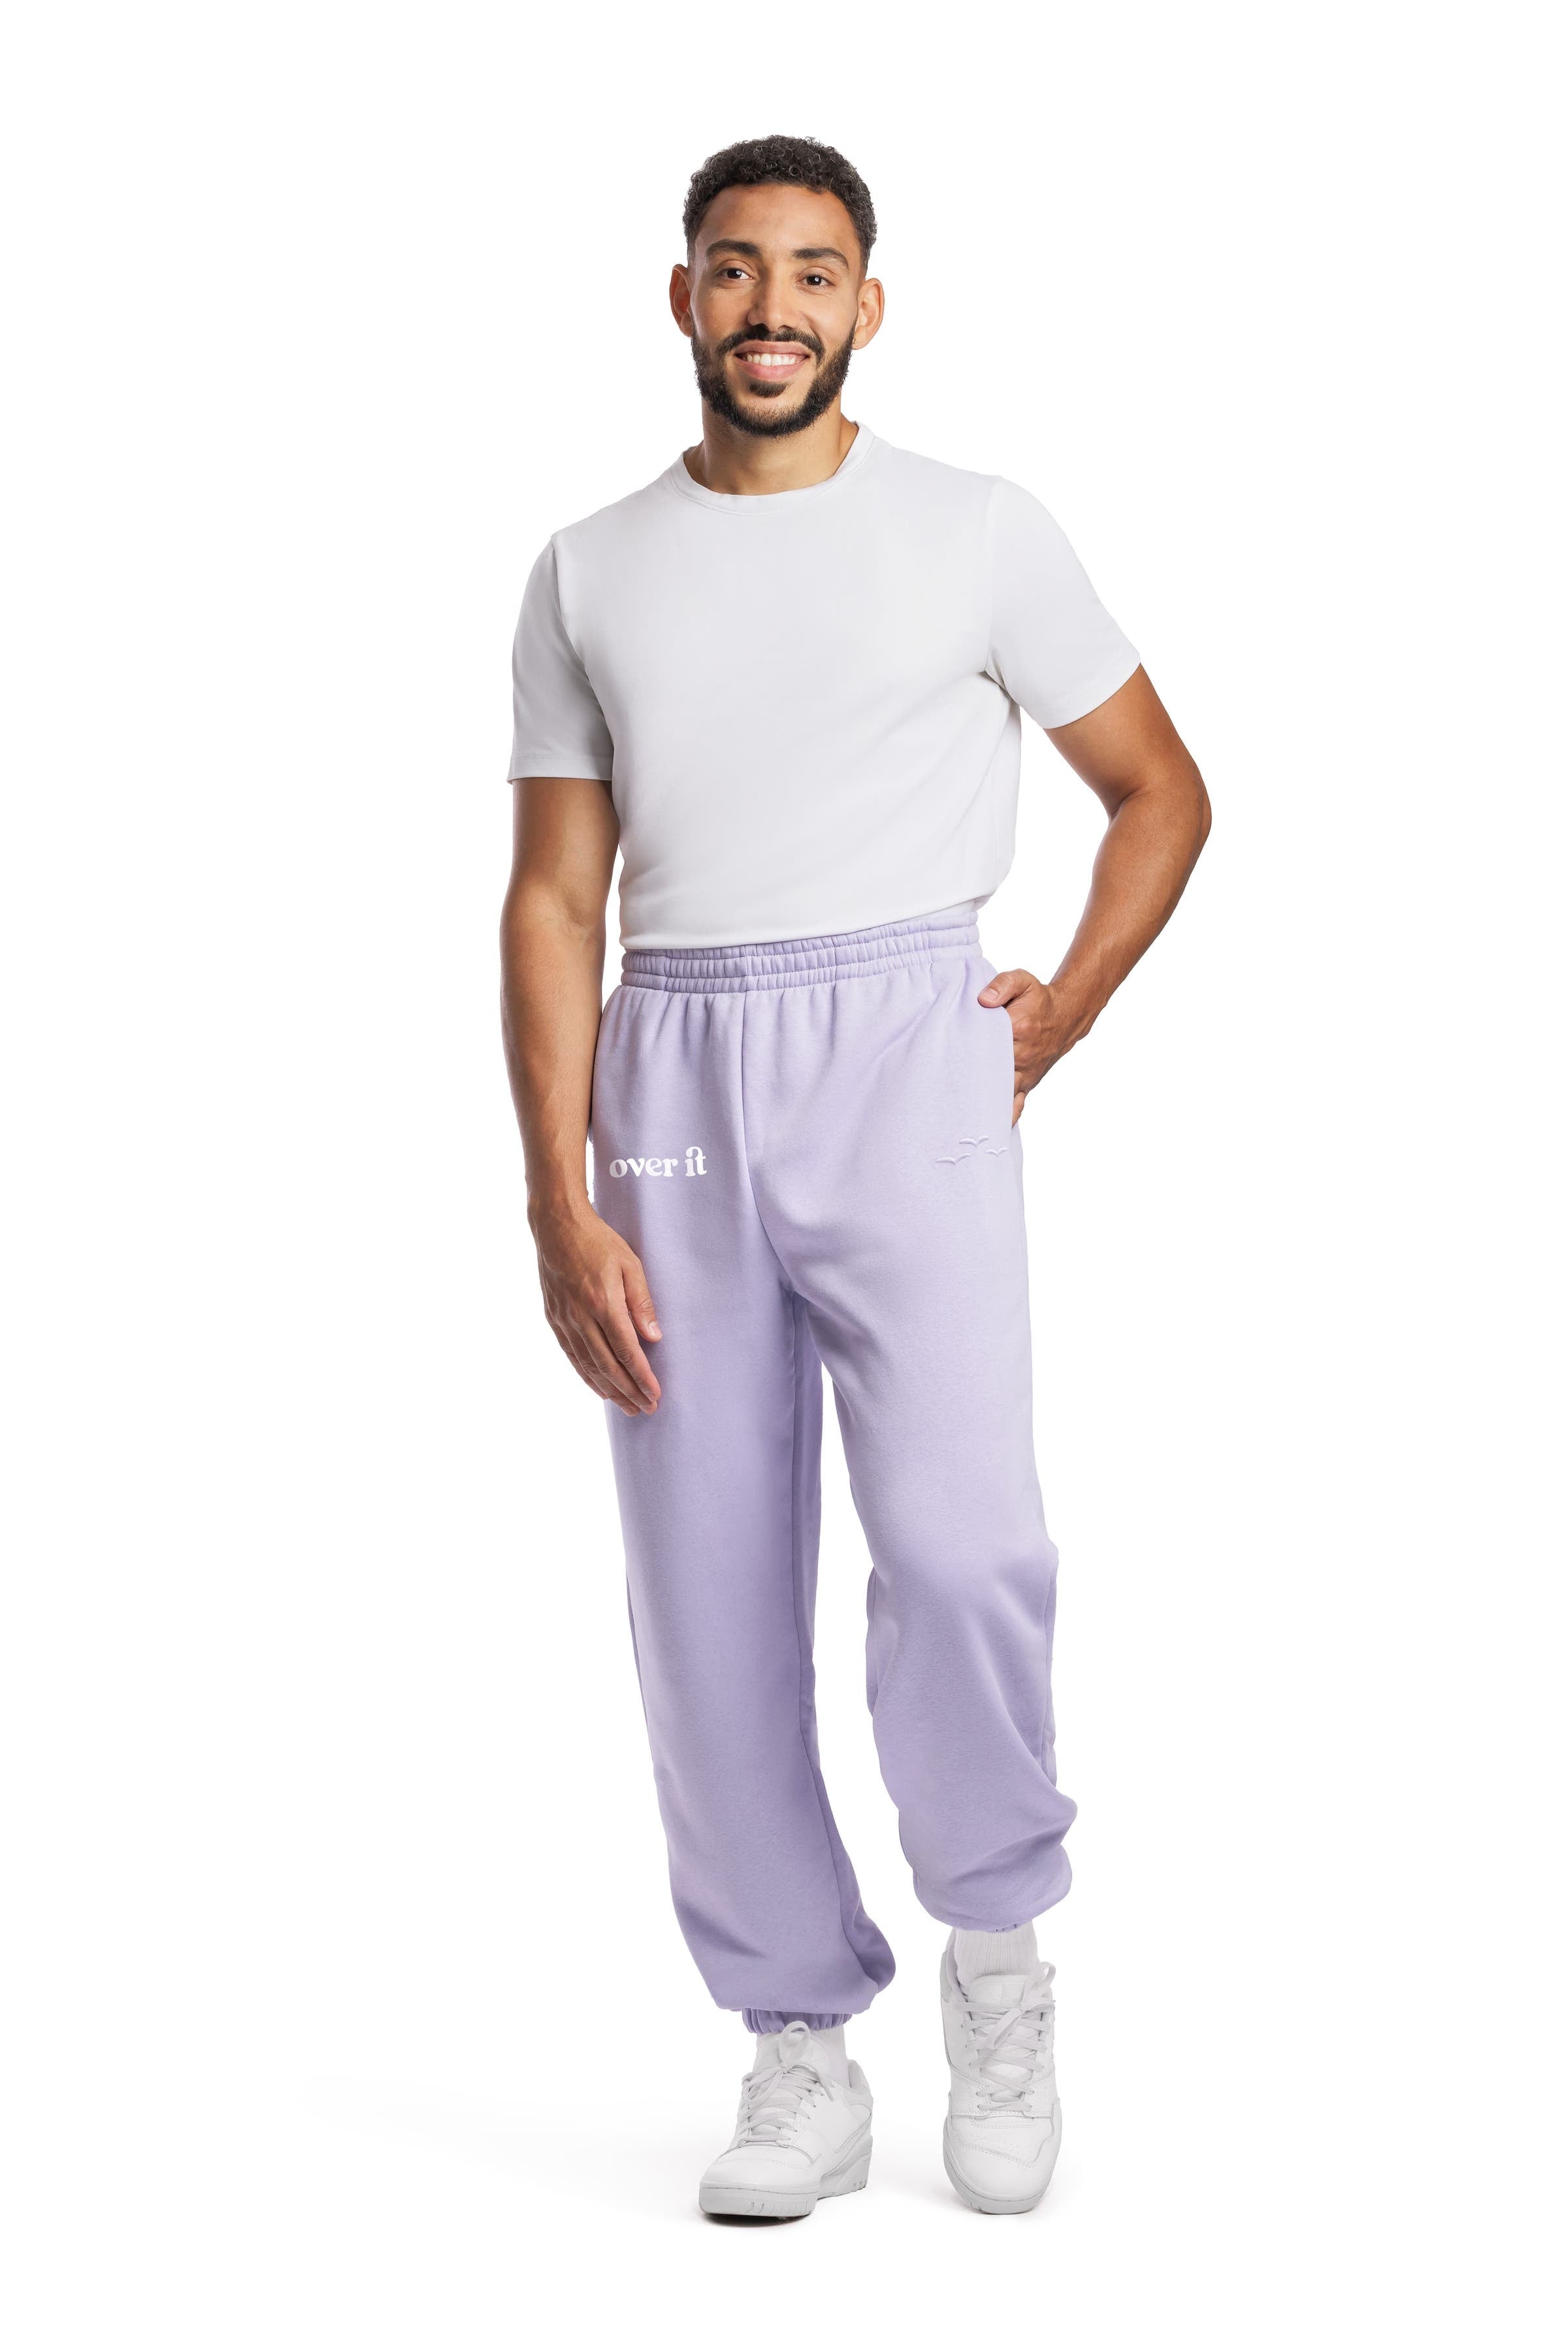 Cheeky relaxed jogger in lavender